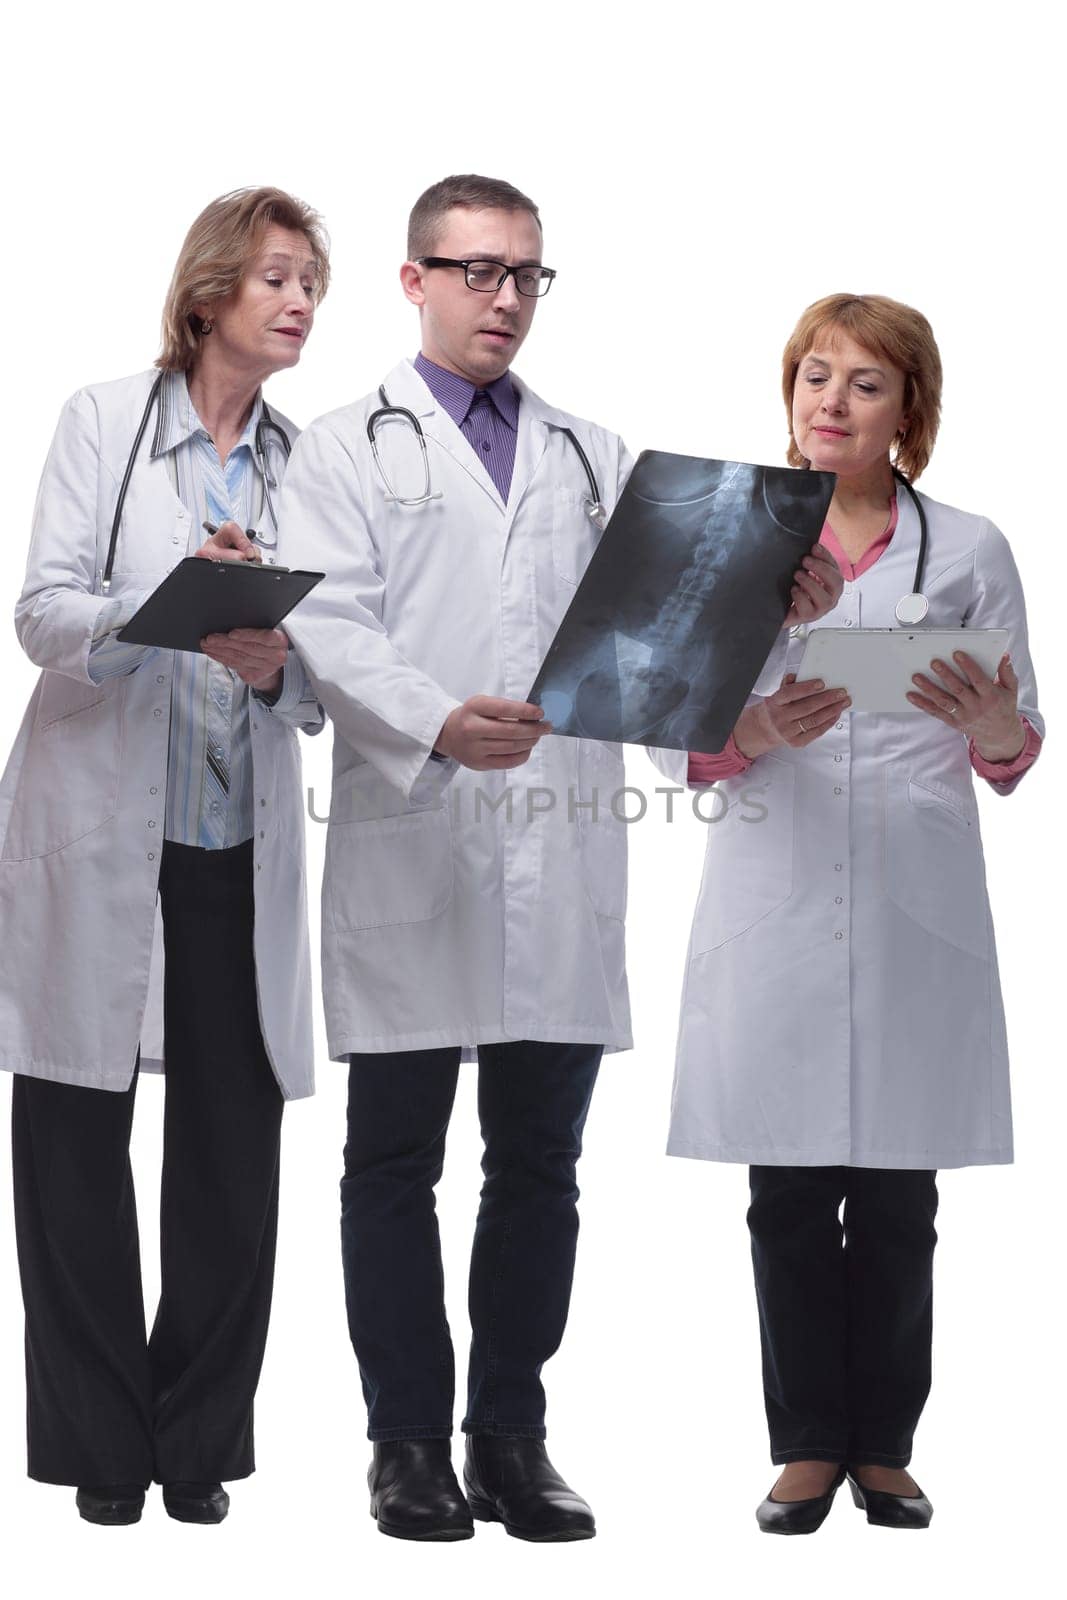 Medical team discussing diagnosis of x-ray image. Healthcare, medical and radiology concept